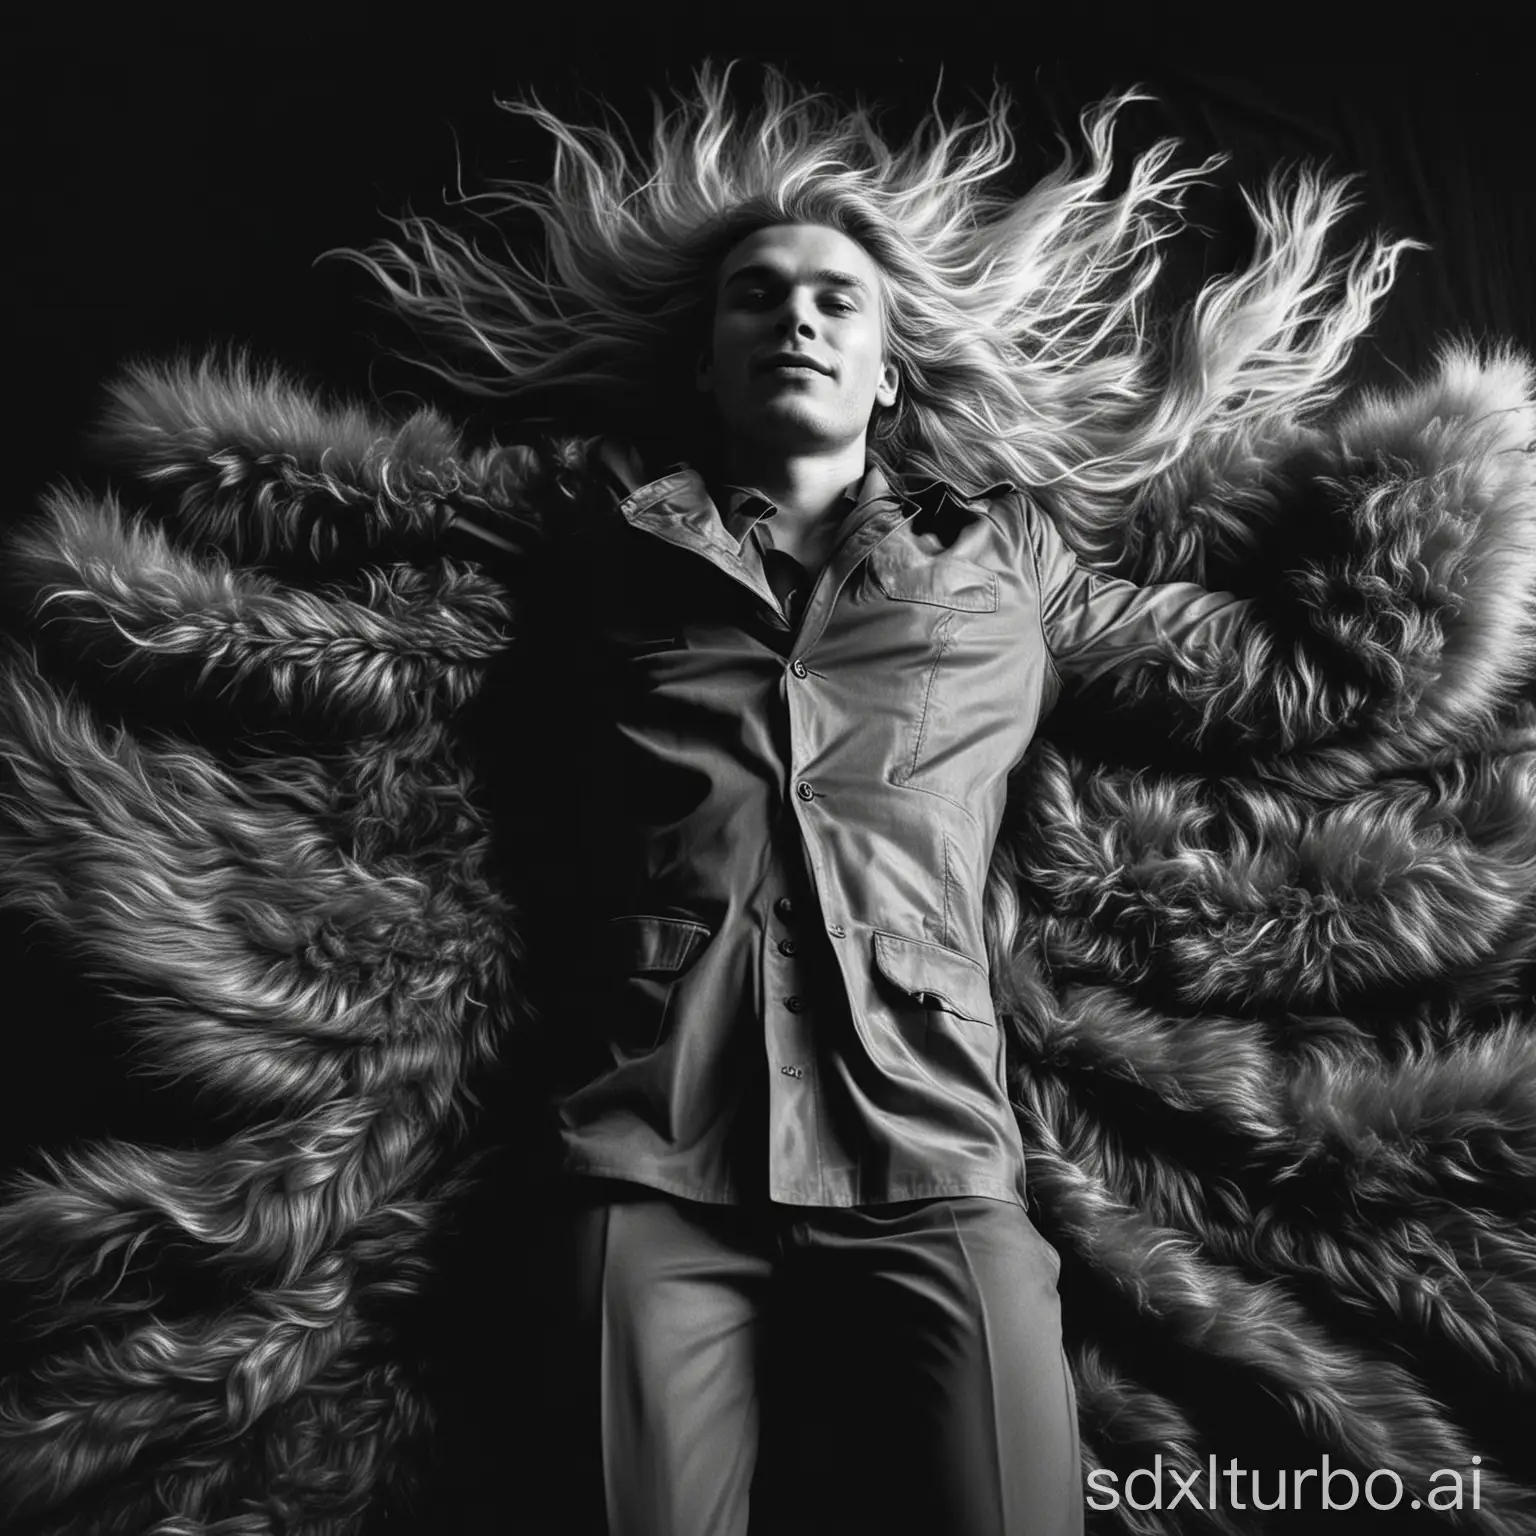 A white man with long, wavy, messy blond hair, dressed in a fur coat. Lying on the floor, arms outstretched, on top of black silk. On black background and uniform color, in a 1980s photographic studio. Photograph. Artistic photography from the 1980s. Photograph by Richard Corman. https://richardcorman.com/. Bokeh effect with grain in the photograph. Grayscale. Artificial light. Short medium shot.